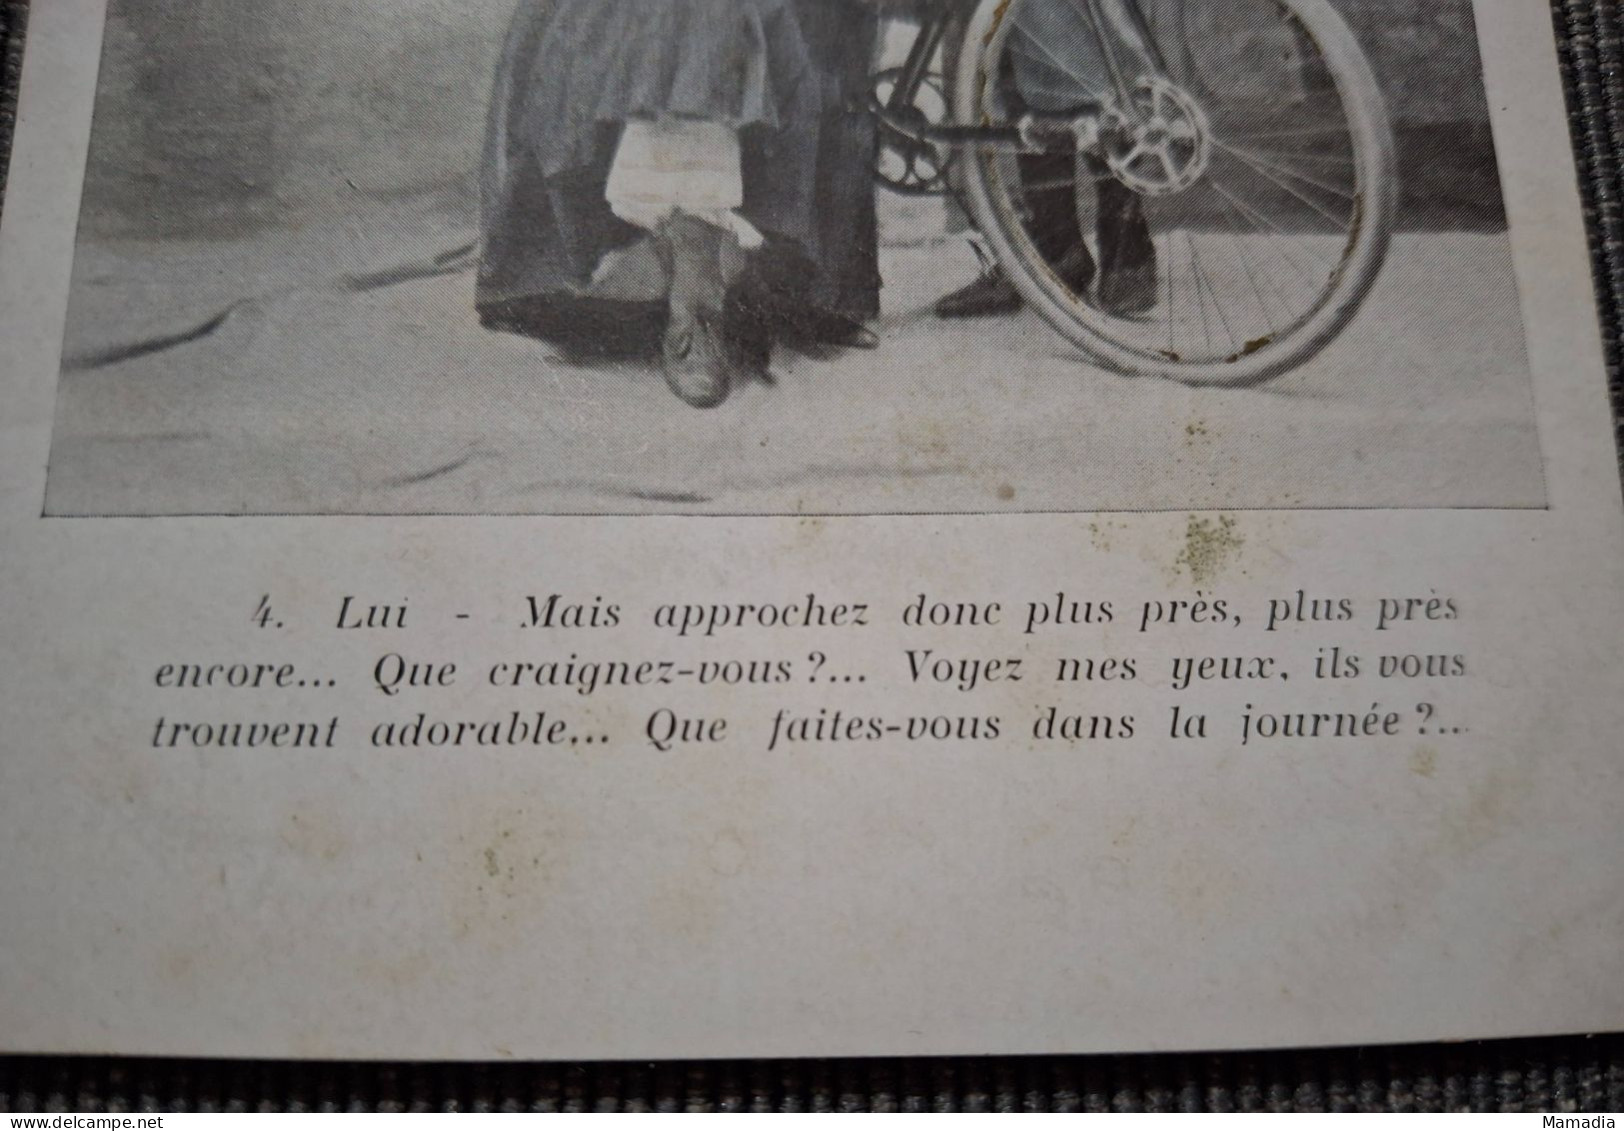 CARTE POSTALE ANCIENNE CYCLE VELO SERIE "MADEMOISELLE ECOUTEZ-MOI DONC" N°4 / 6 - Koppels